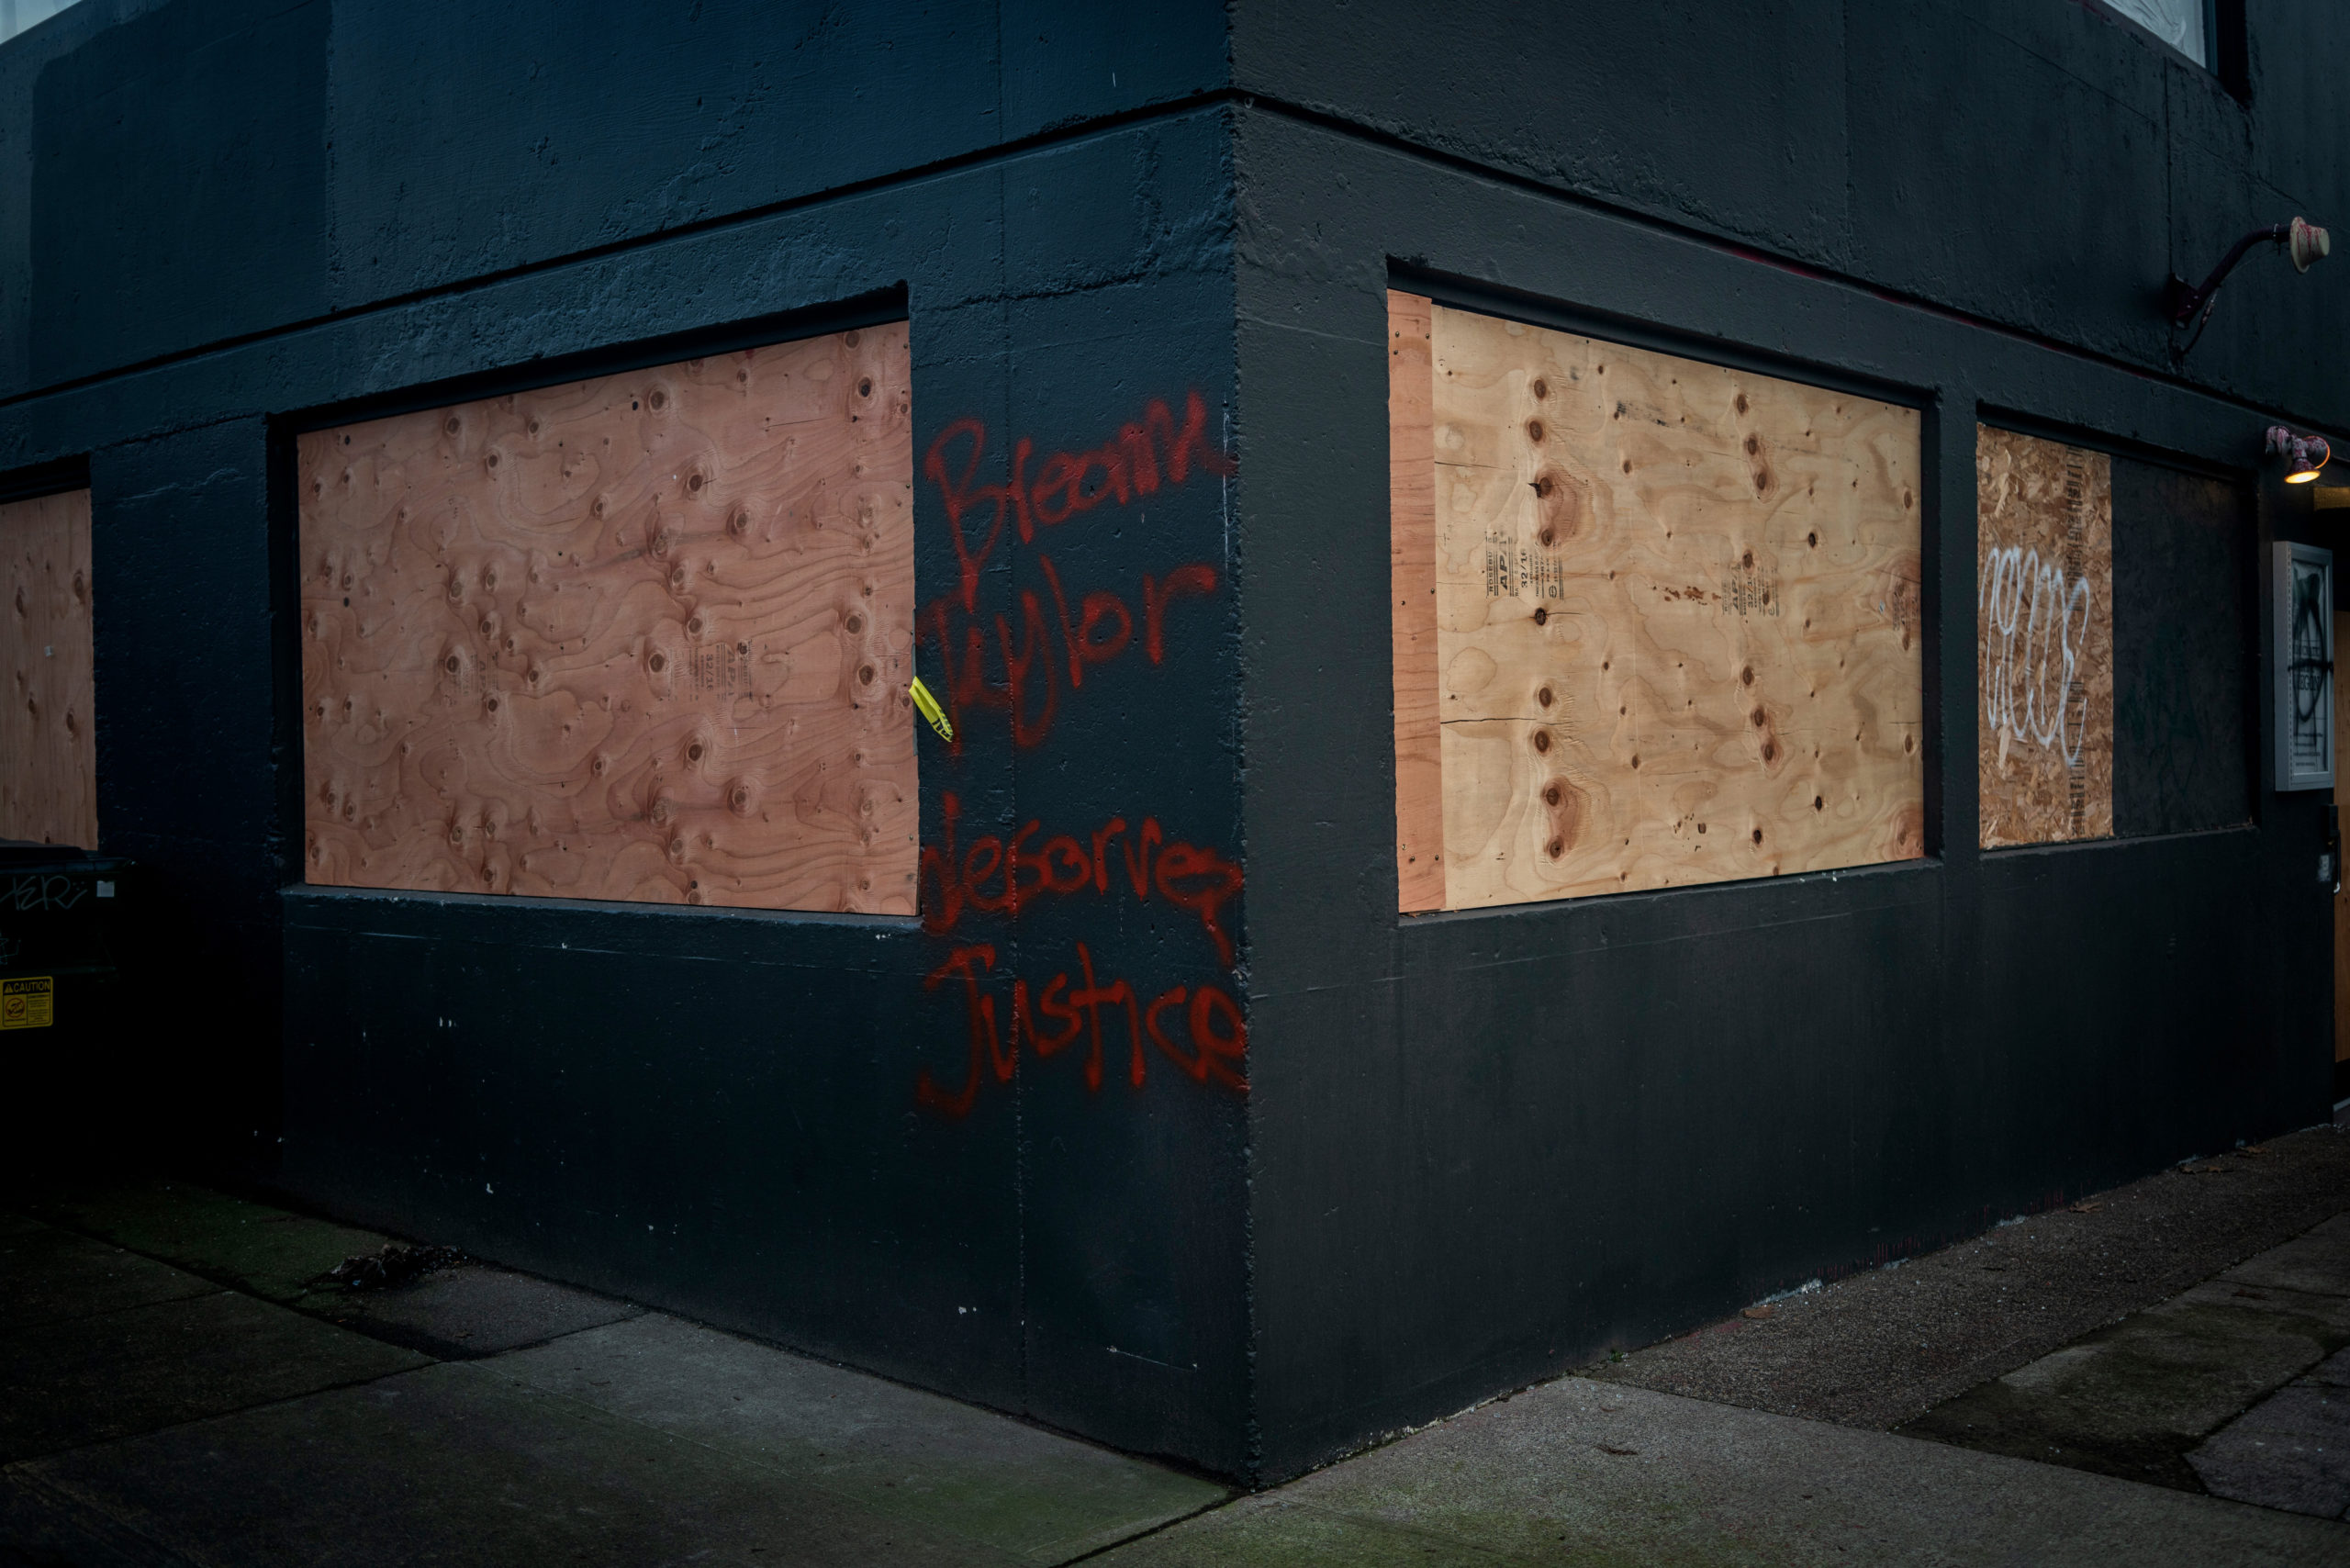 The Democratic Party of Oregon headquarters, seen on January 29, 2021, was the site of an anti-facist and anti-police protest on Inauguration Day, when protesters broke windows and set a fire in a nearby dumpster. The street in front of the headquarters is where Sean Kealiher, 23, an anti-facist activist was killed after leaving a nearby bar in 2019.